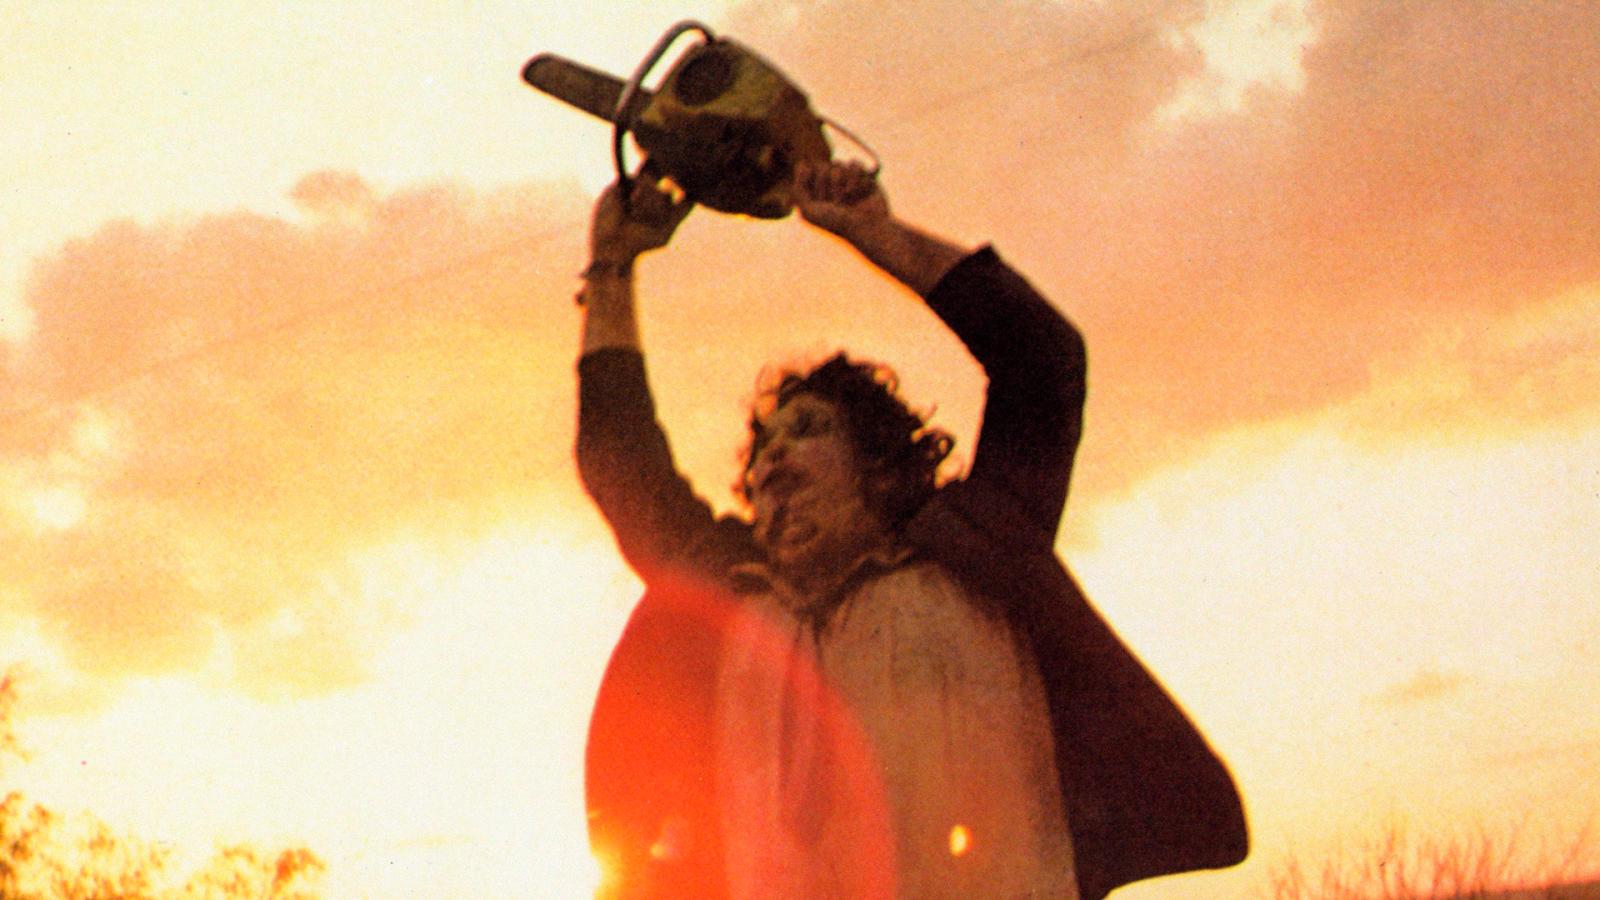 5 Unsettling Behind-The-Scenes Secrets From the Texas Chainsaw Massacre Franchise - image 3